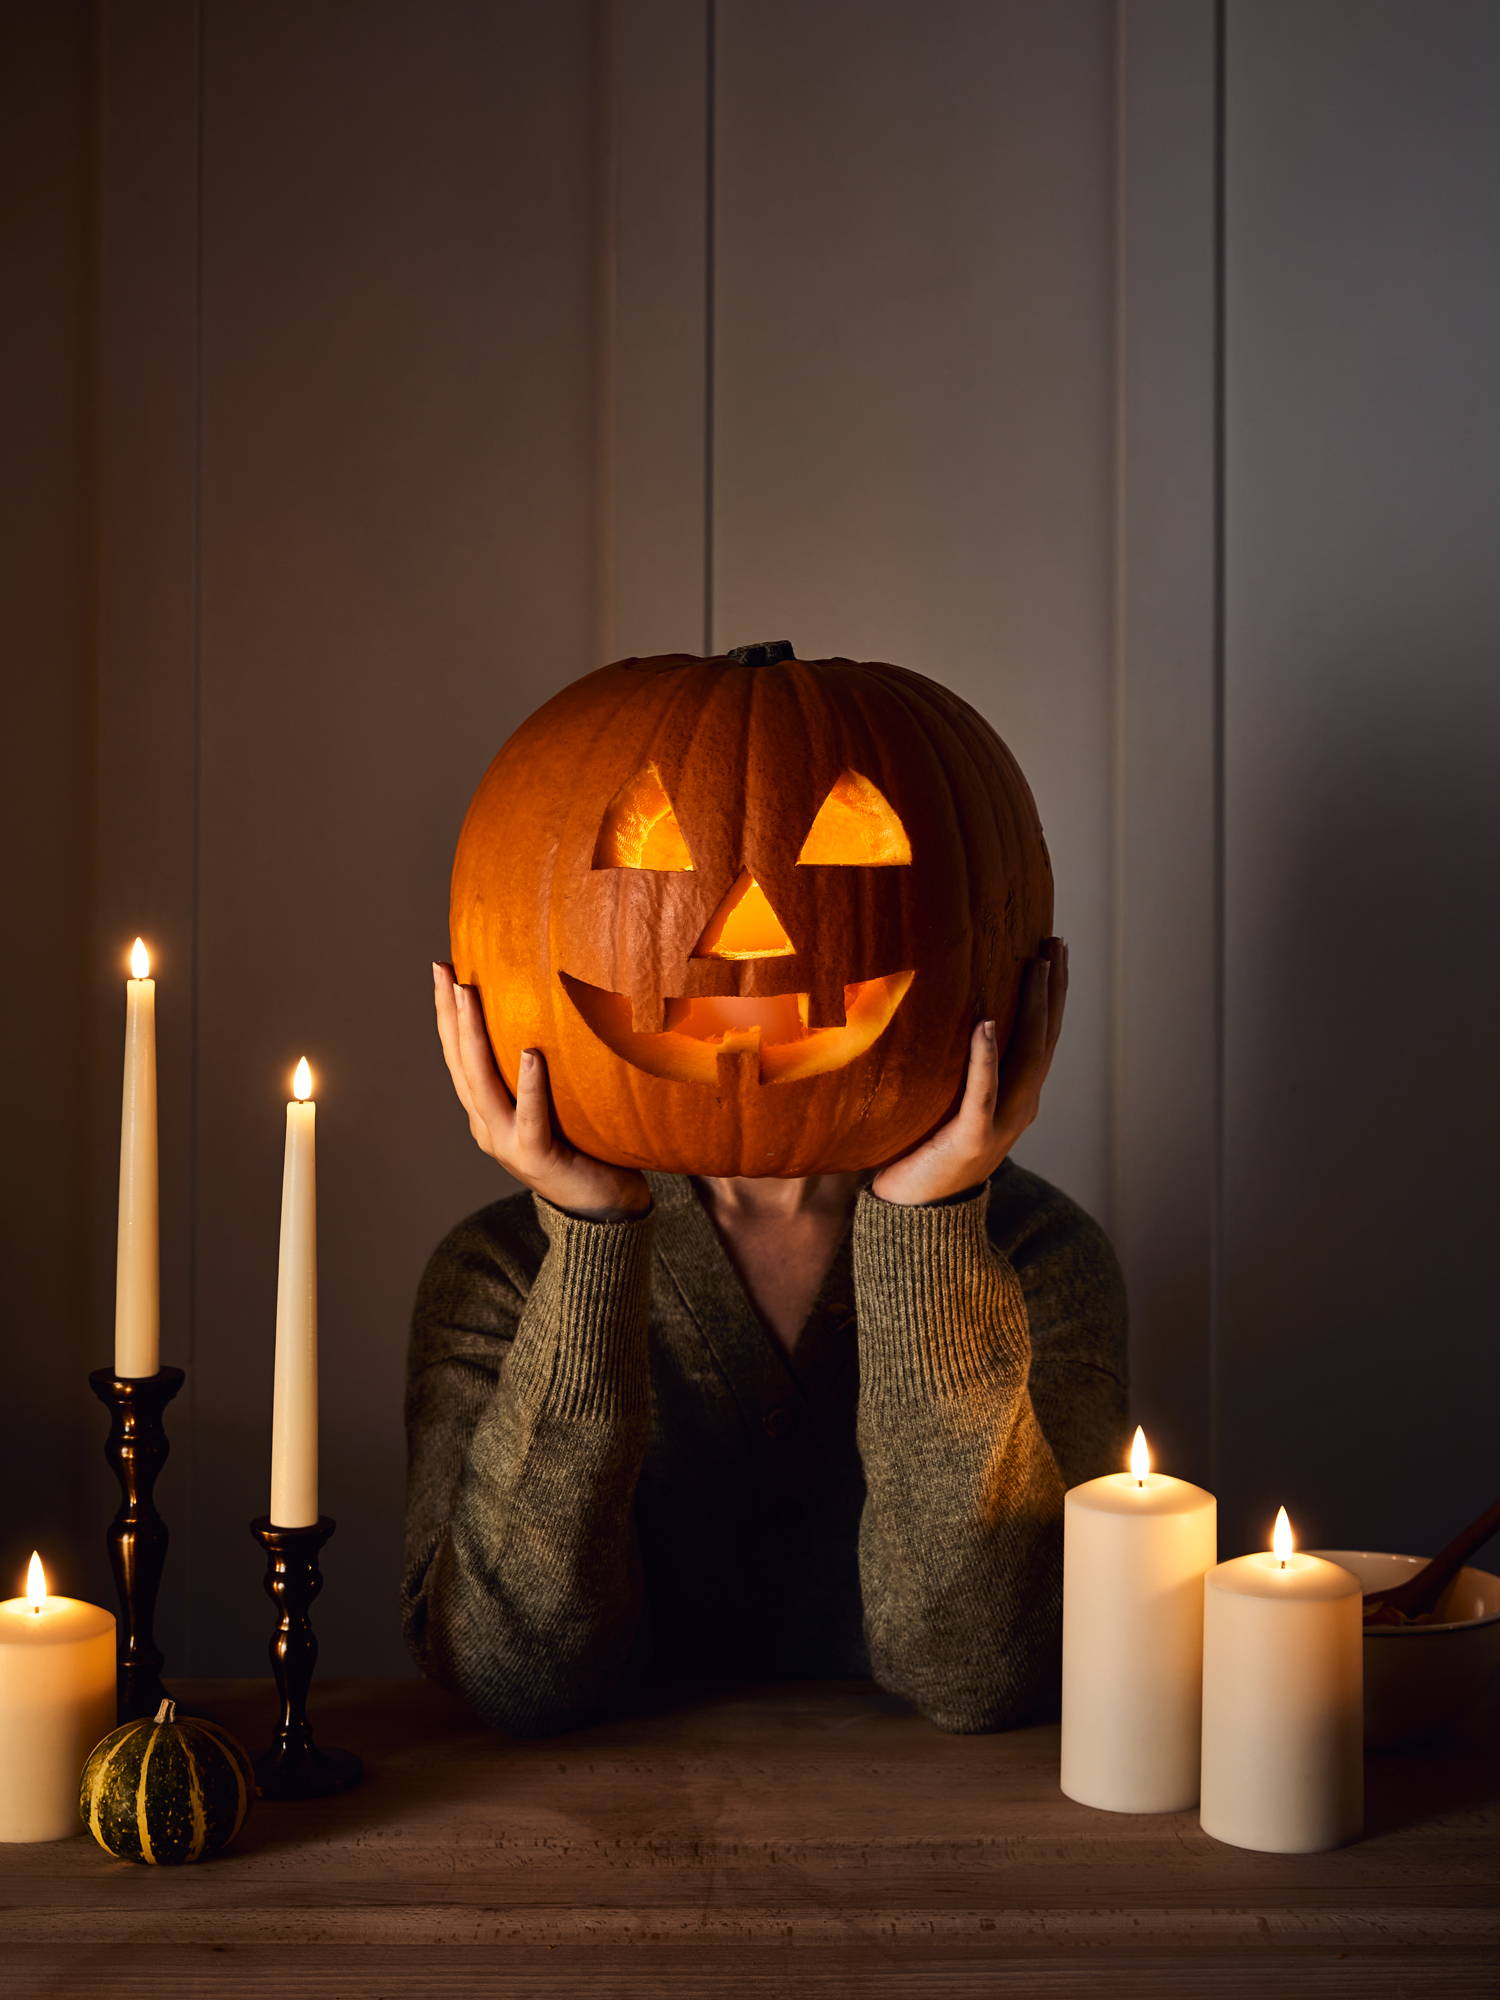 Person holding up completed and lit up pumpkin